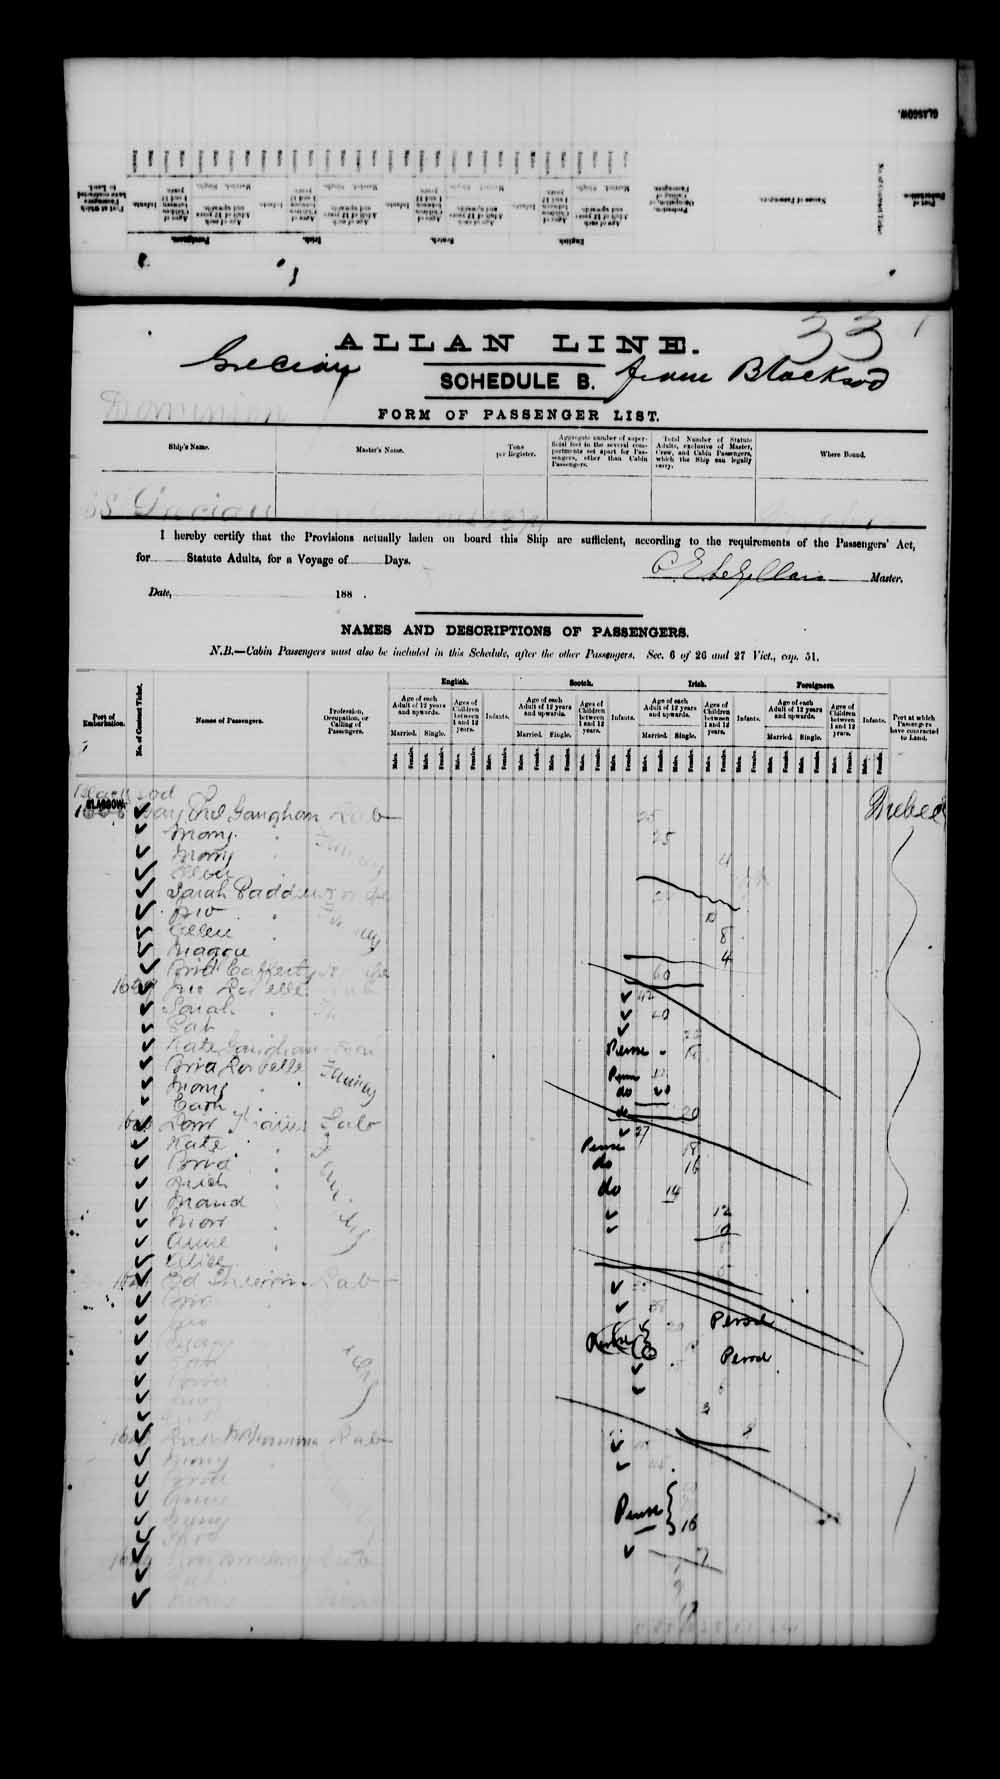 Digitized page of Passenger Lists for Image No.: e003543106